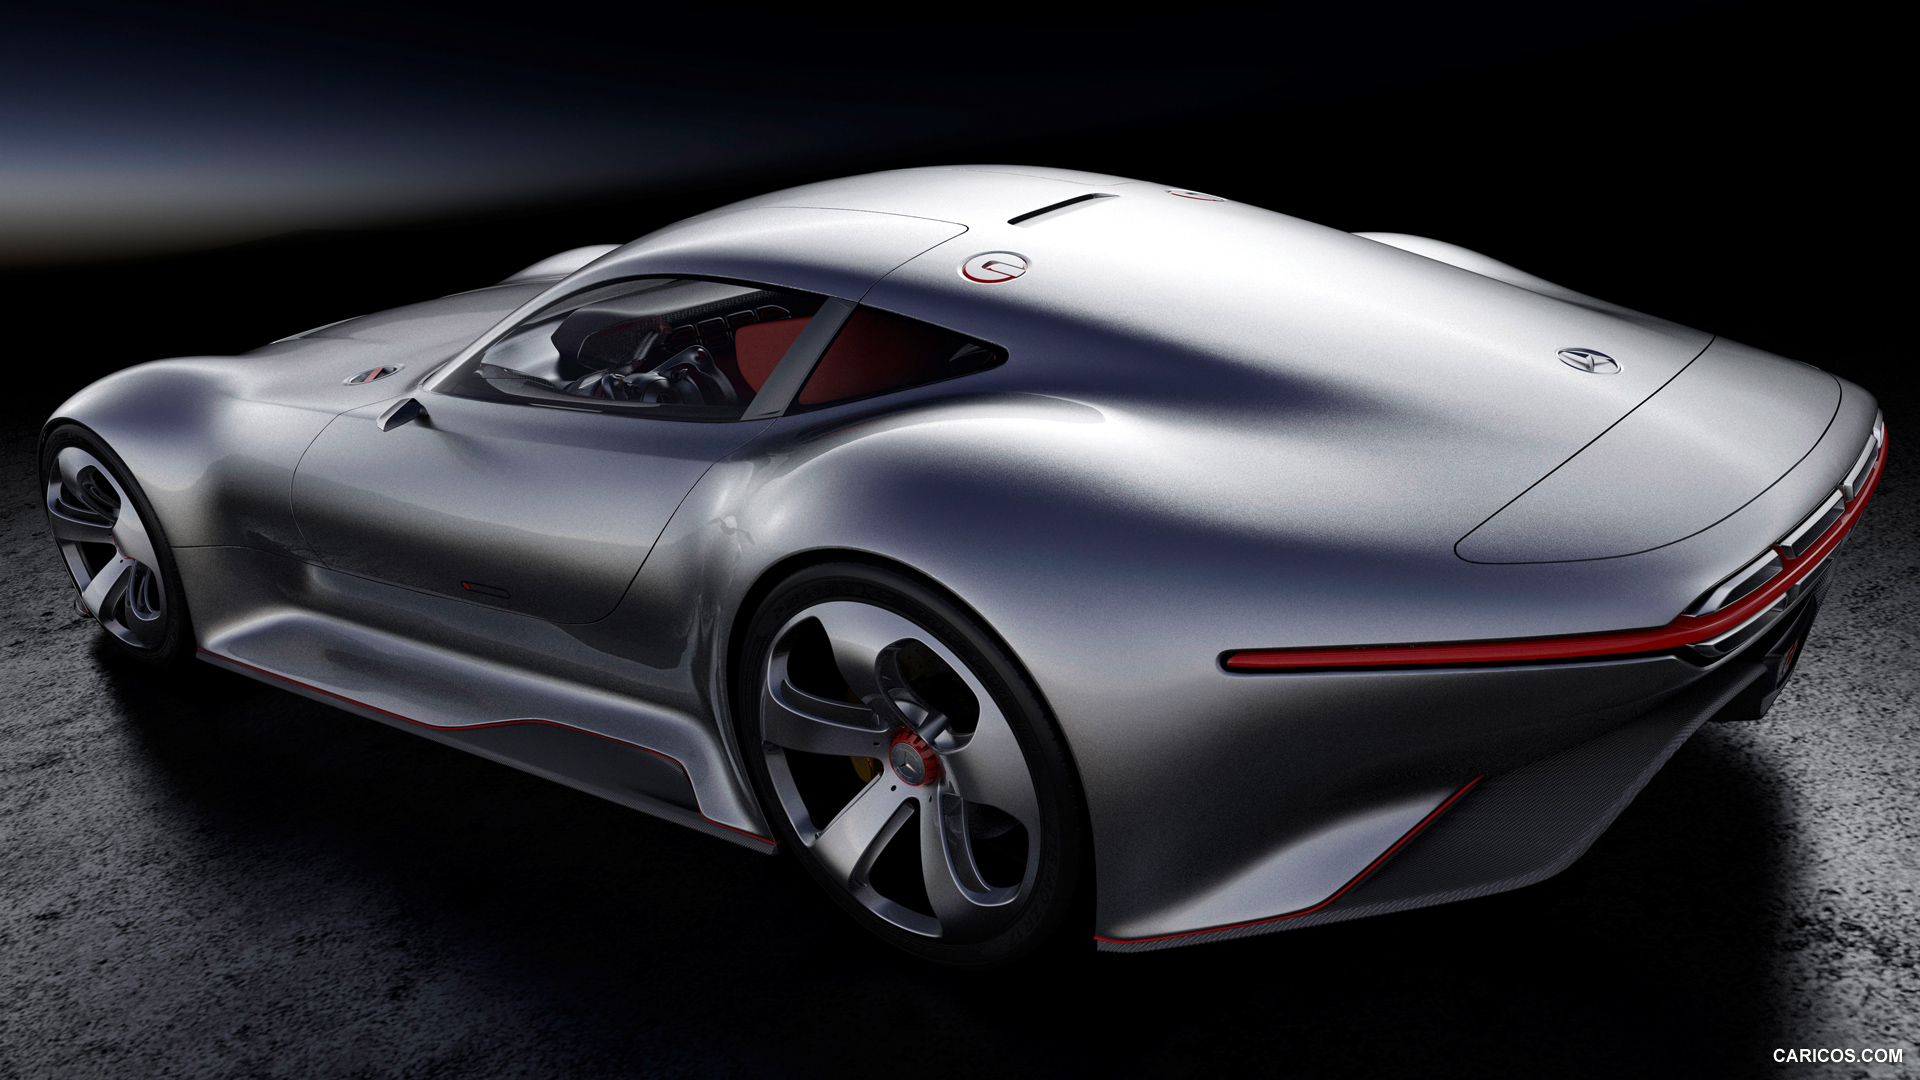 Mercedes-Benz AMG Vision Gran Turismo Concept (2013)  - Side, #20 of 25